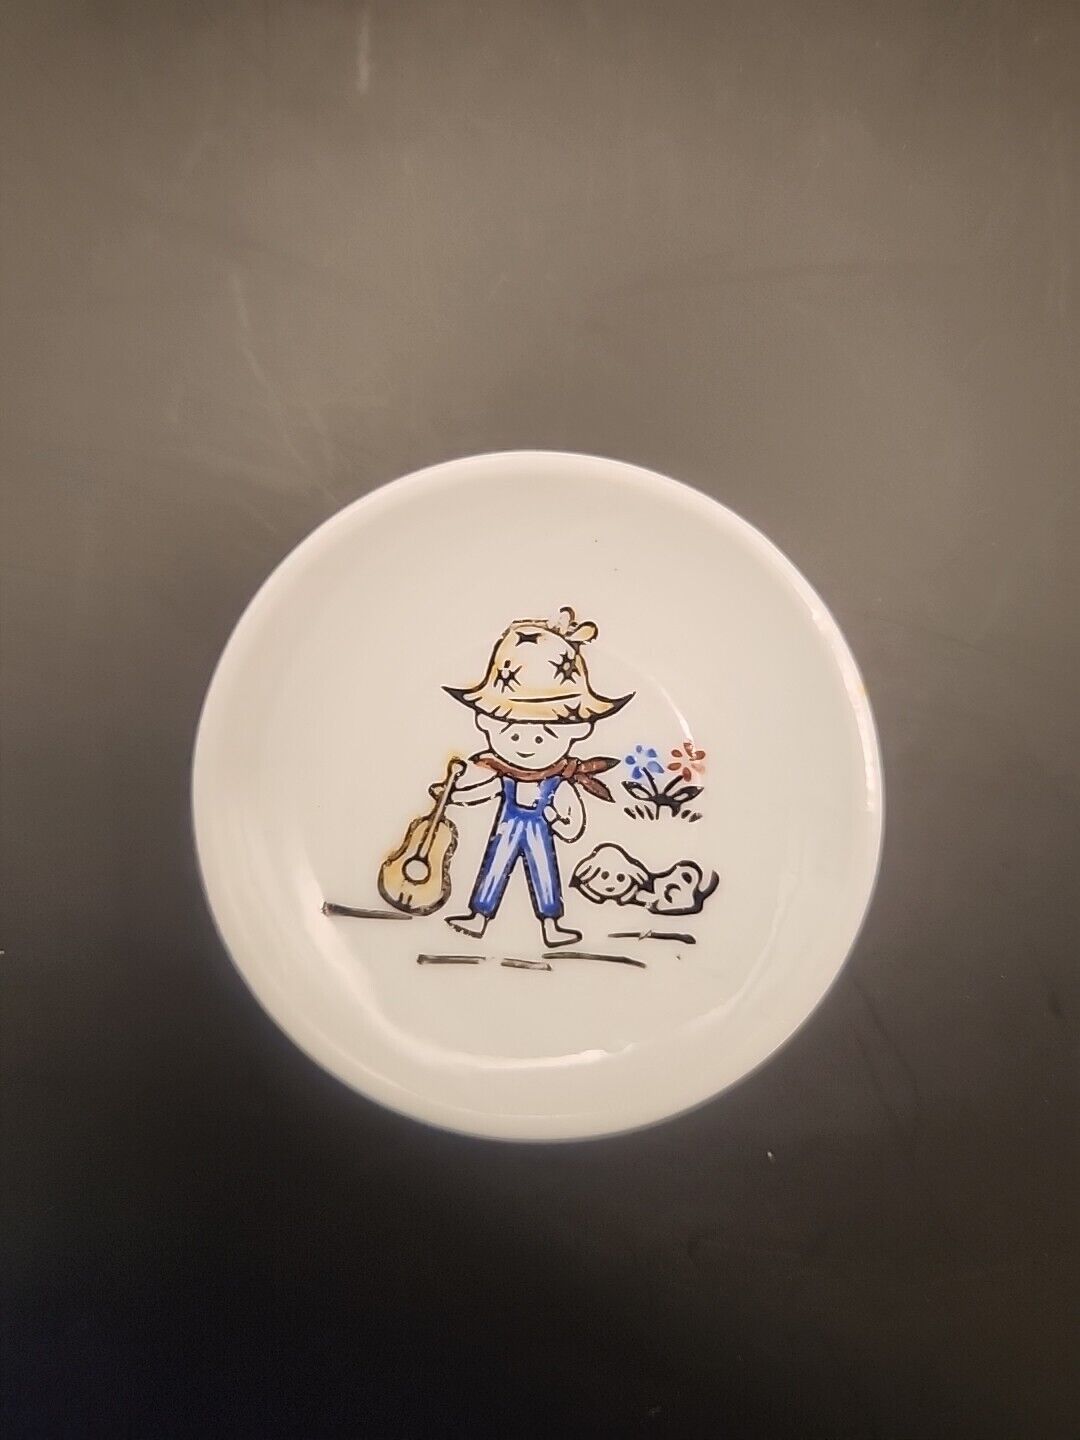 Vintage Miniature China Plate~Made In Japan~Little Farm Boy with Guitar 2.5”